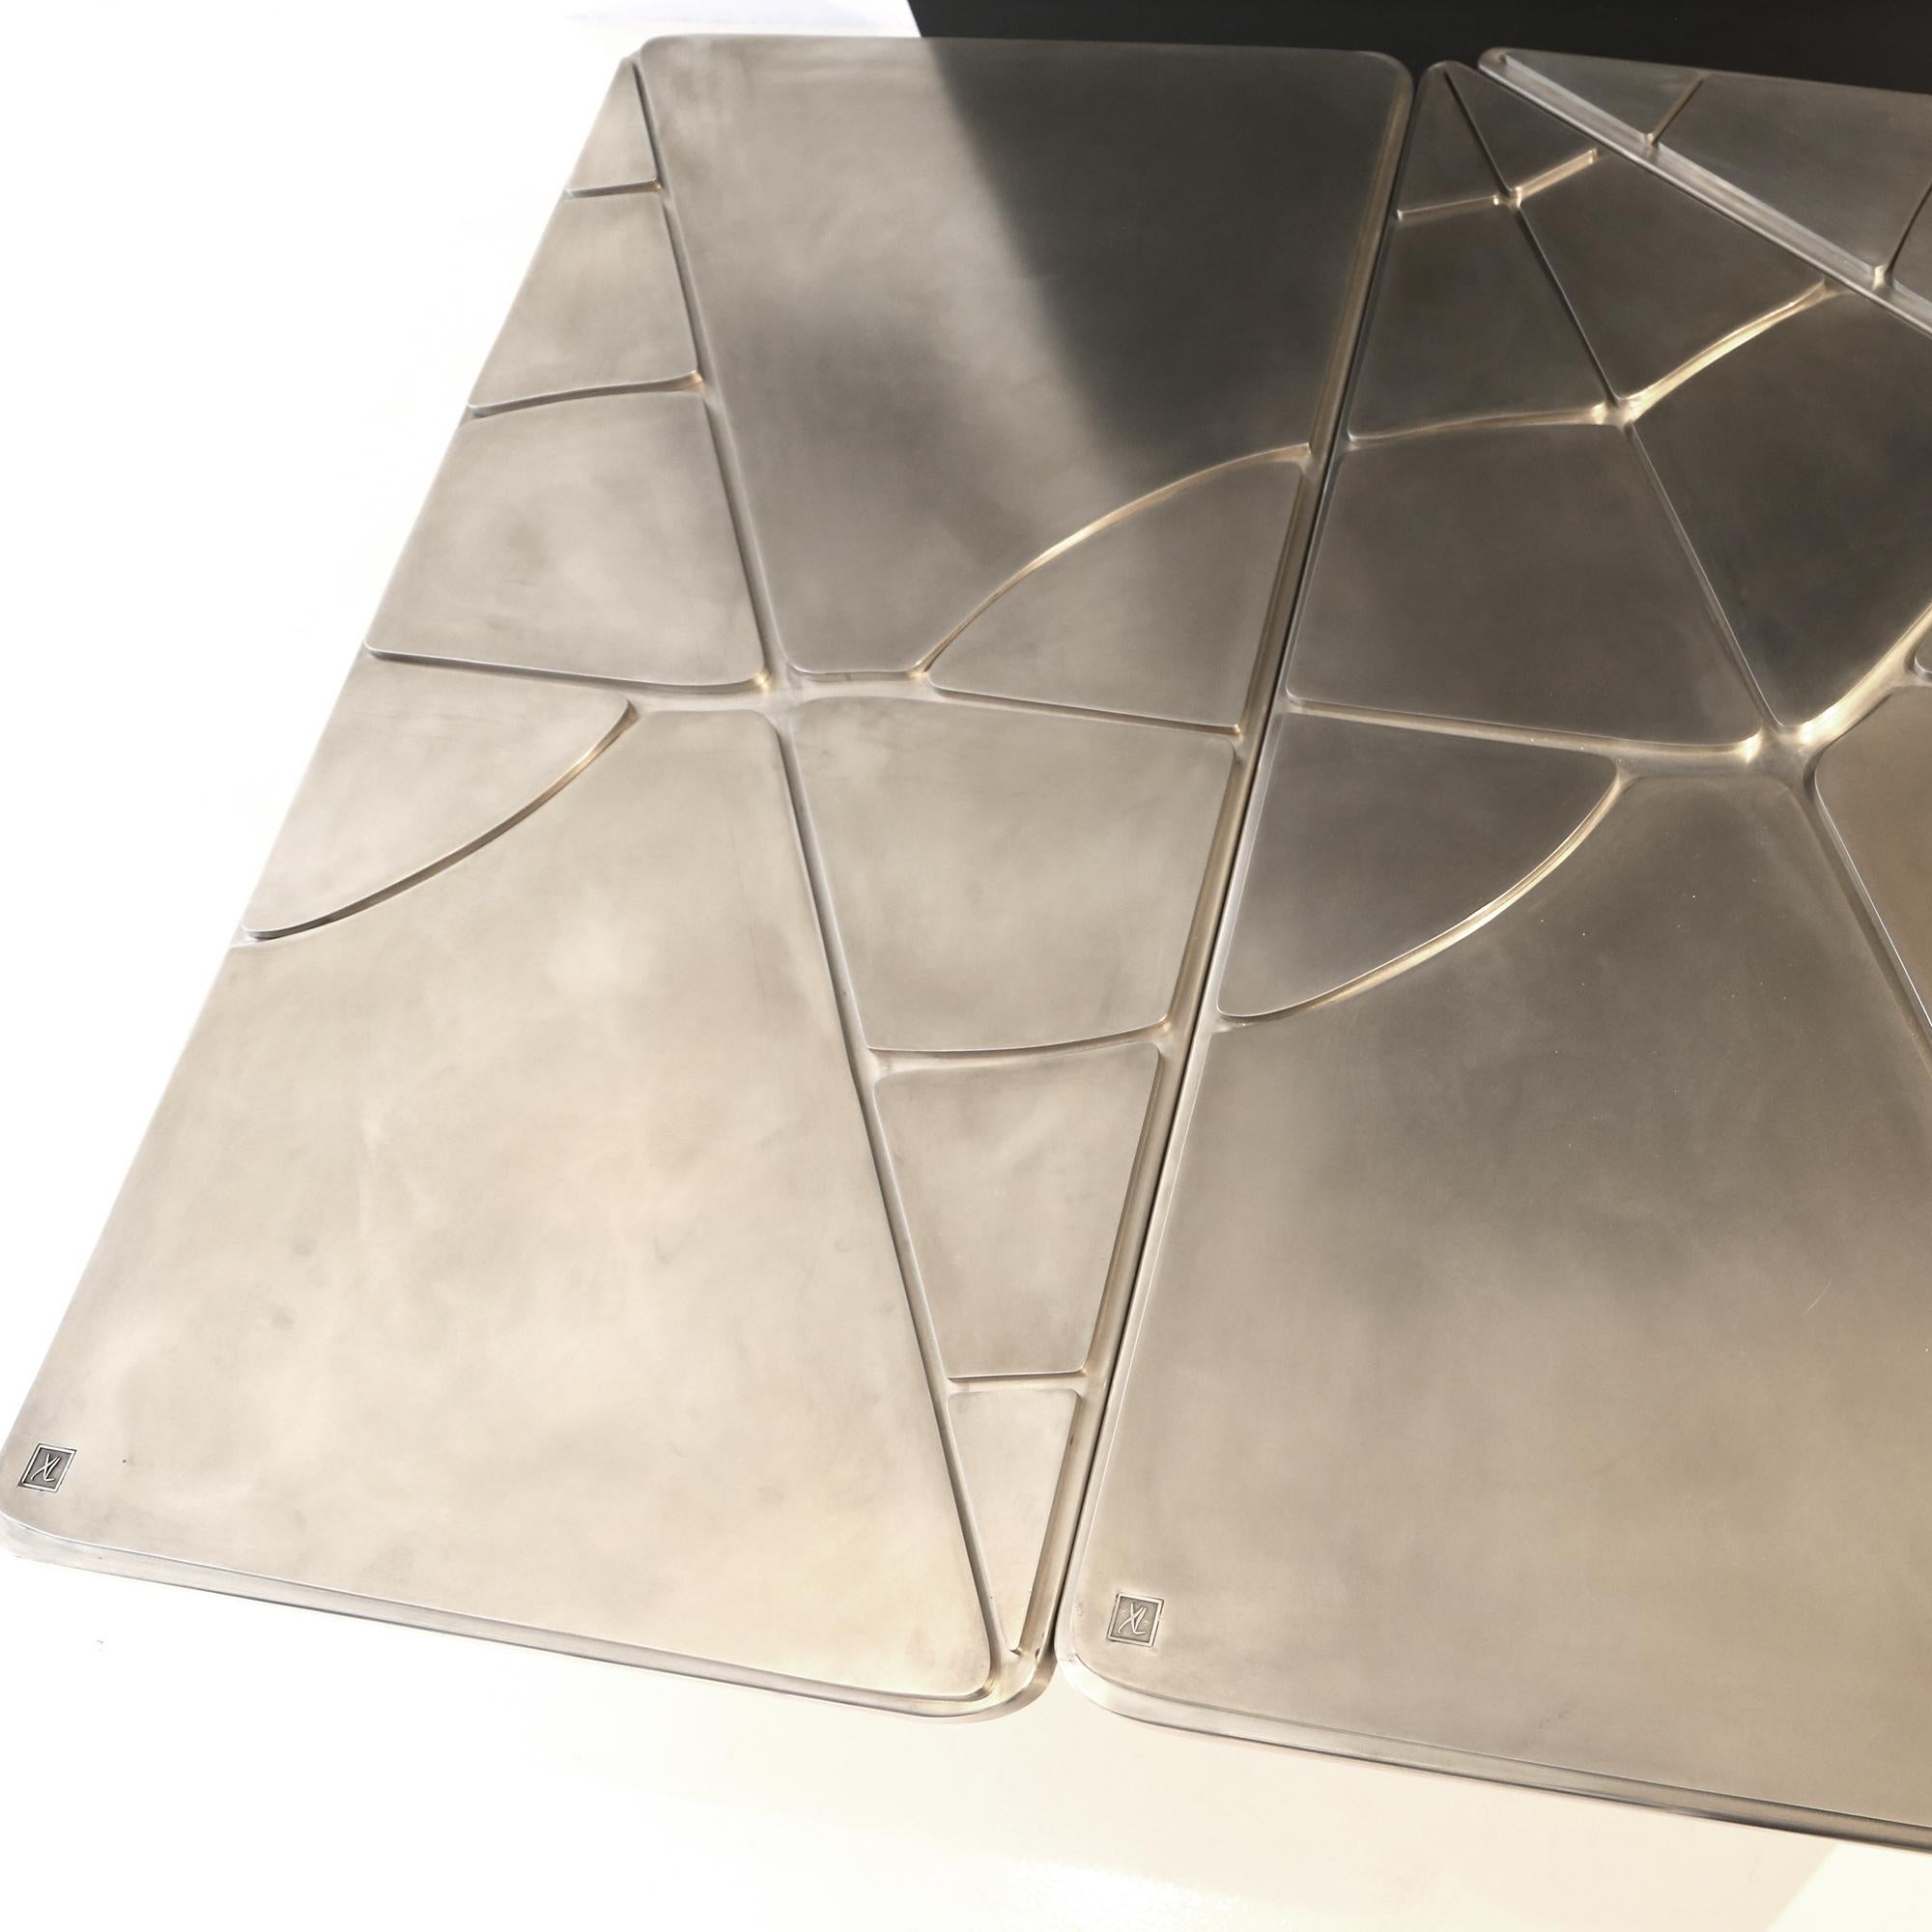 European 21st Century Table - Crack XLA2 - Wrapped in Pewter - Xavier Lavergne France For Sale